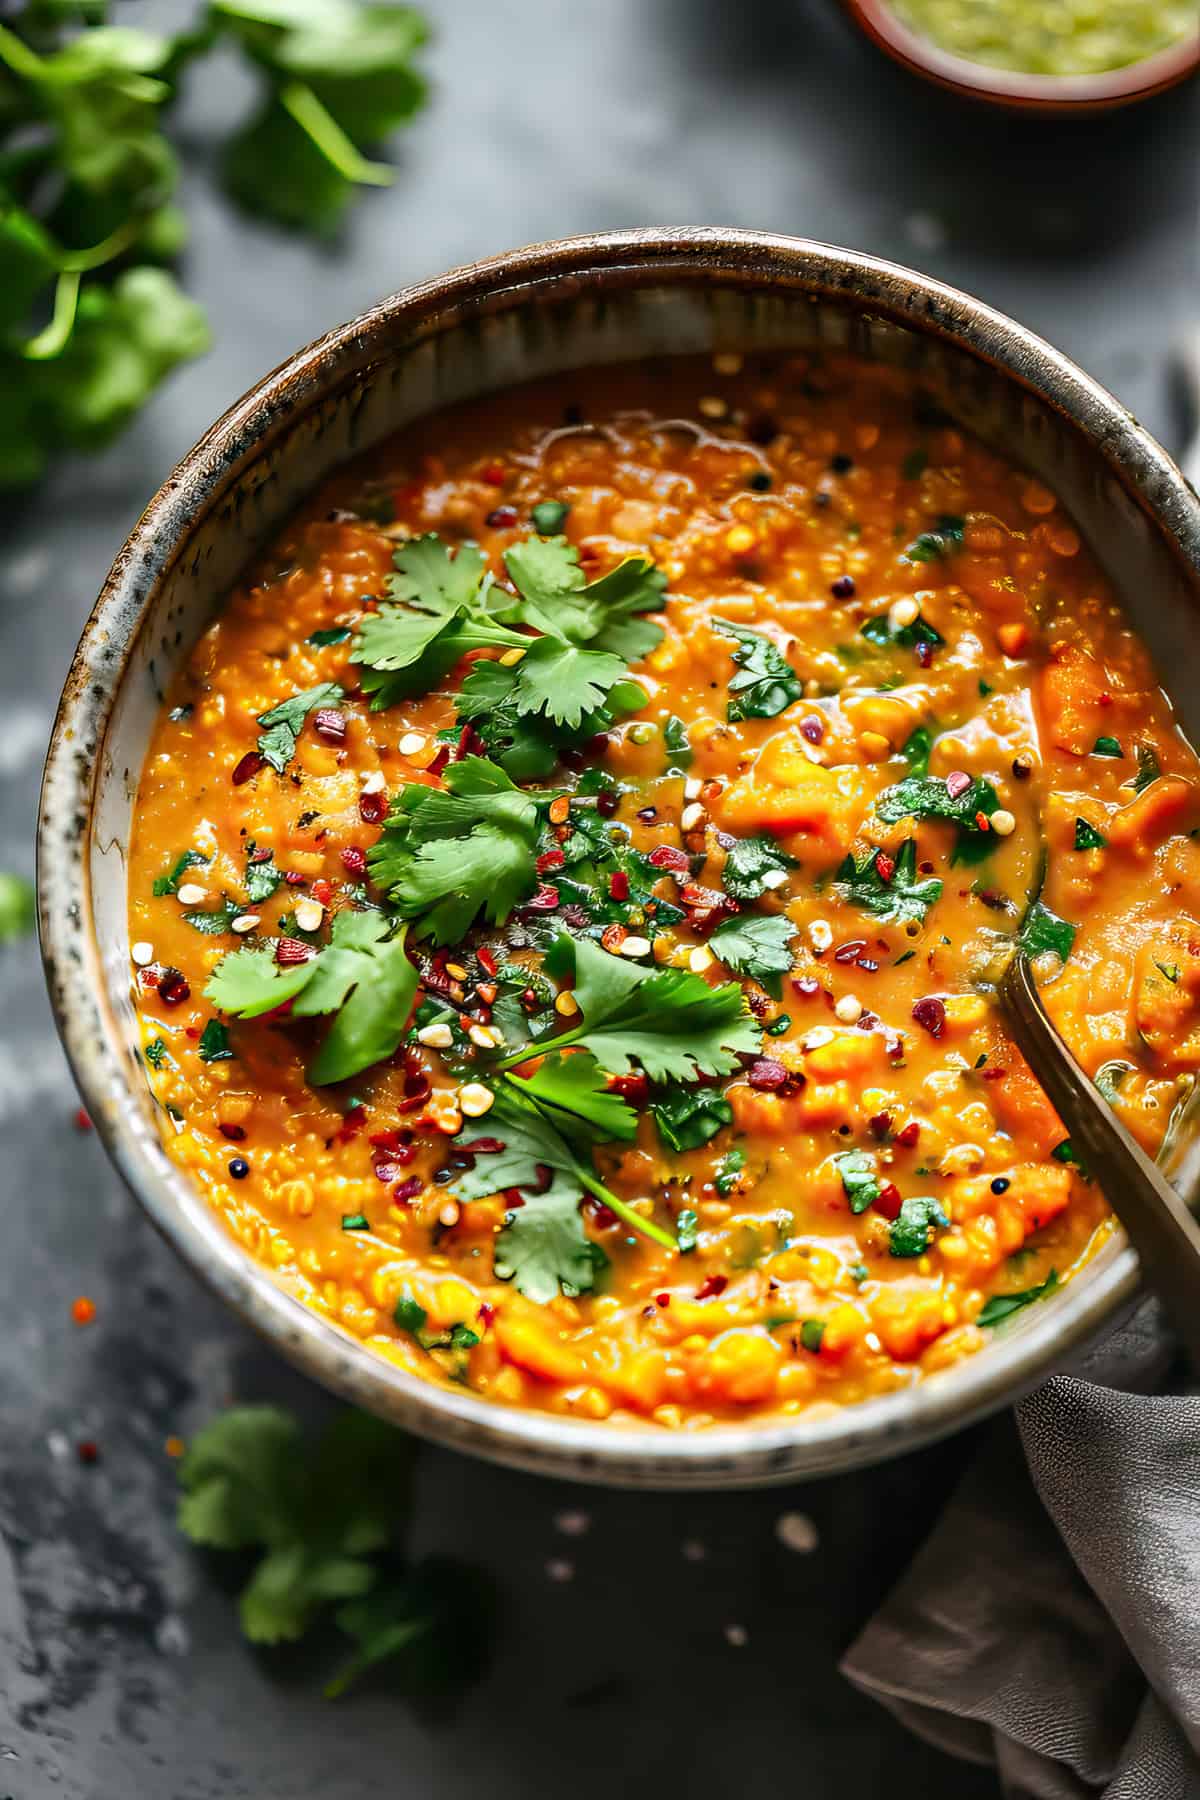 Sweet potato dhal with cilantro and red lentils in a bowl.